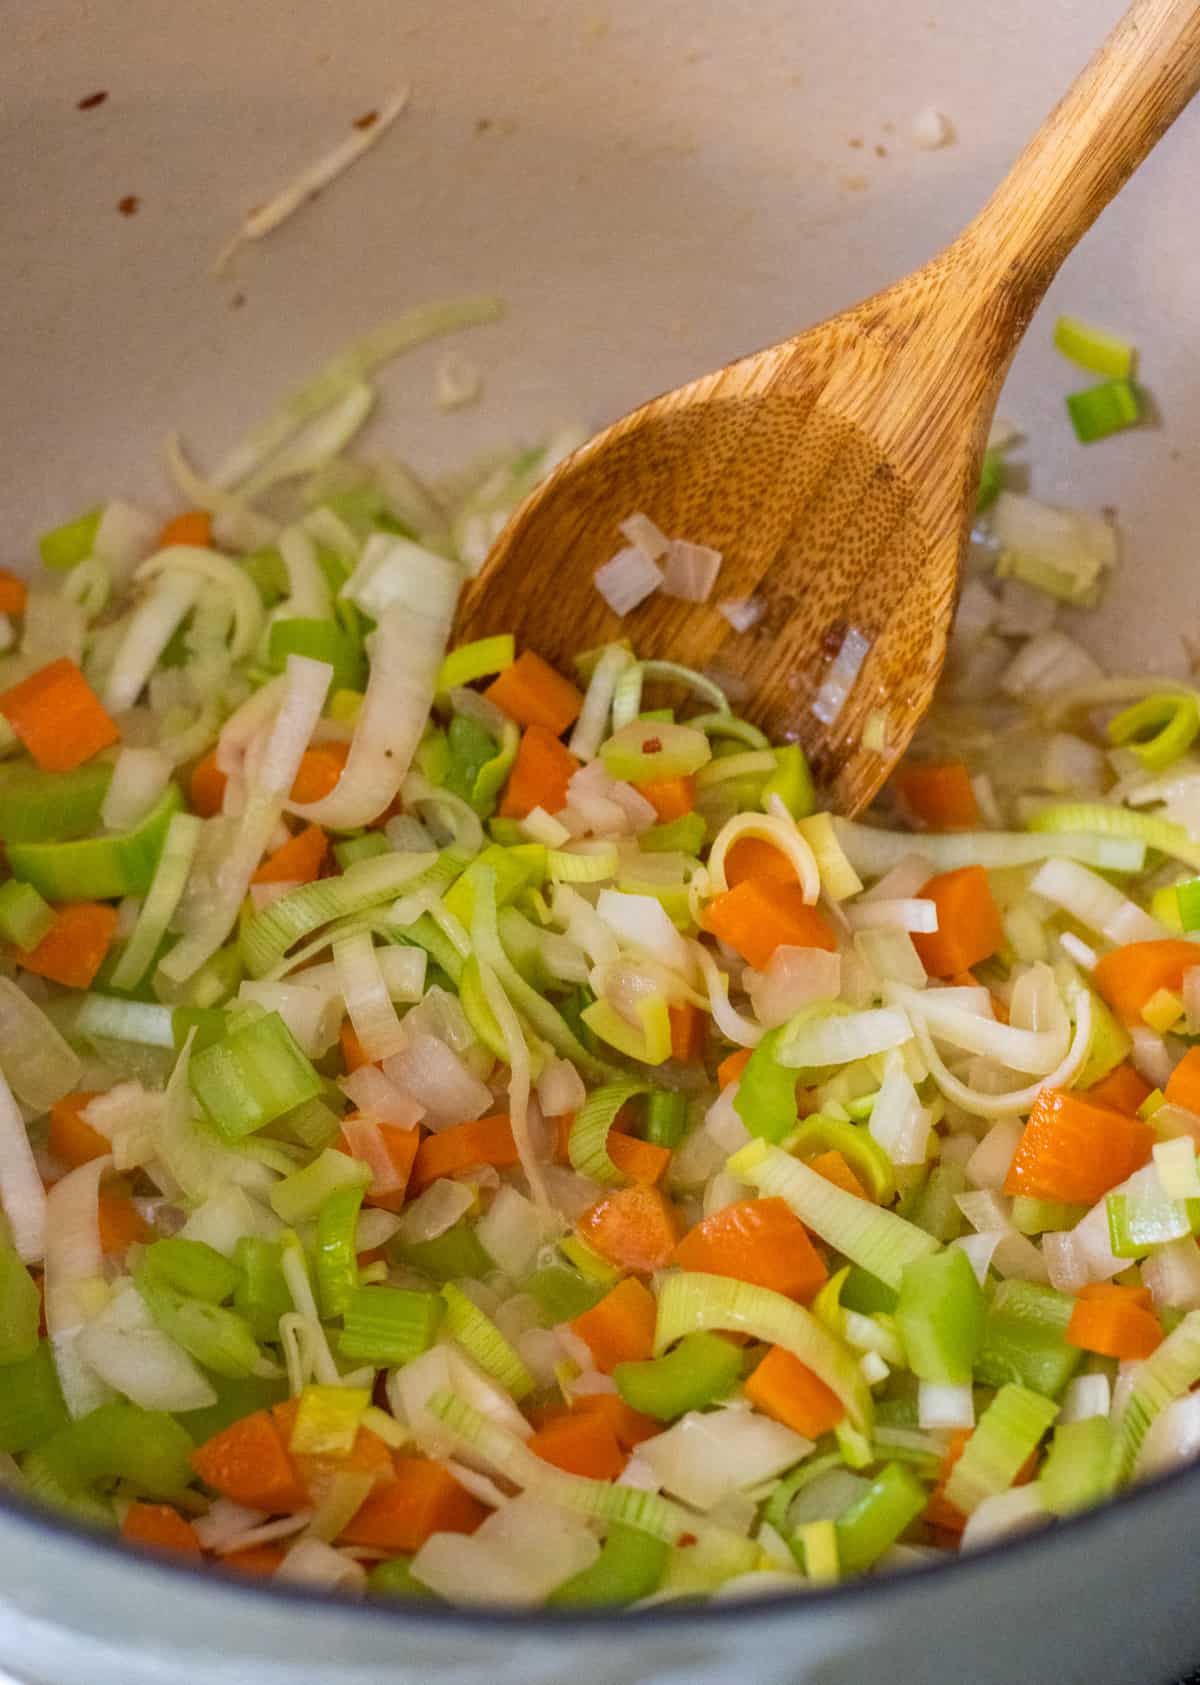 Sliced carrots, celery, onion, leeks, and garlic in a pot with a wooden spoon.